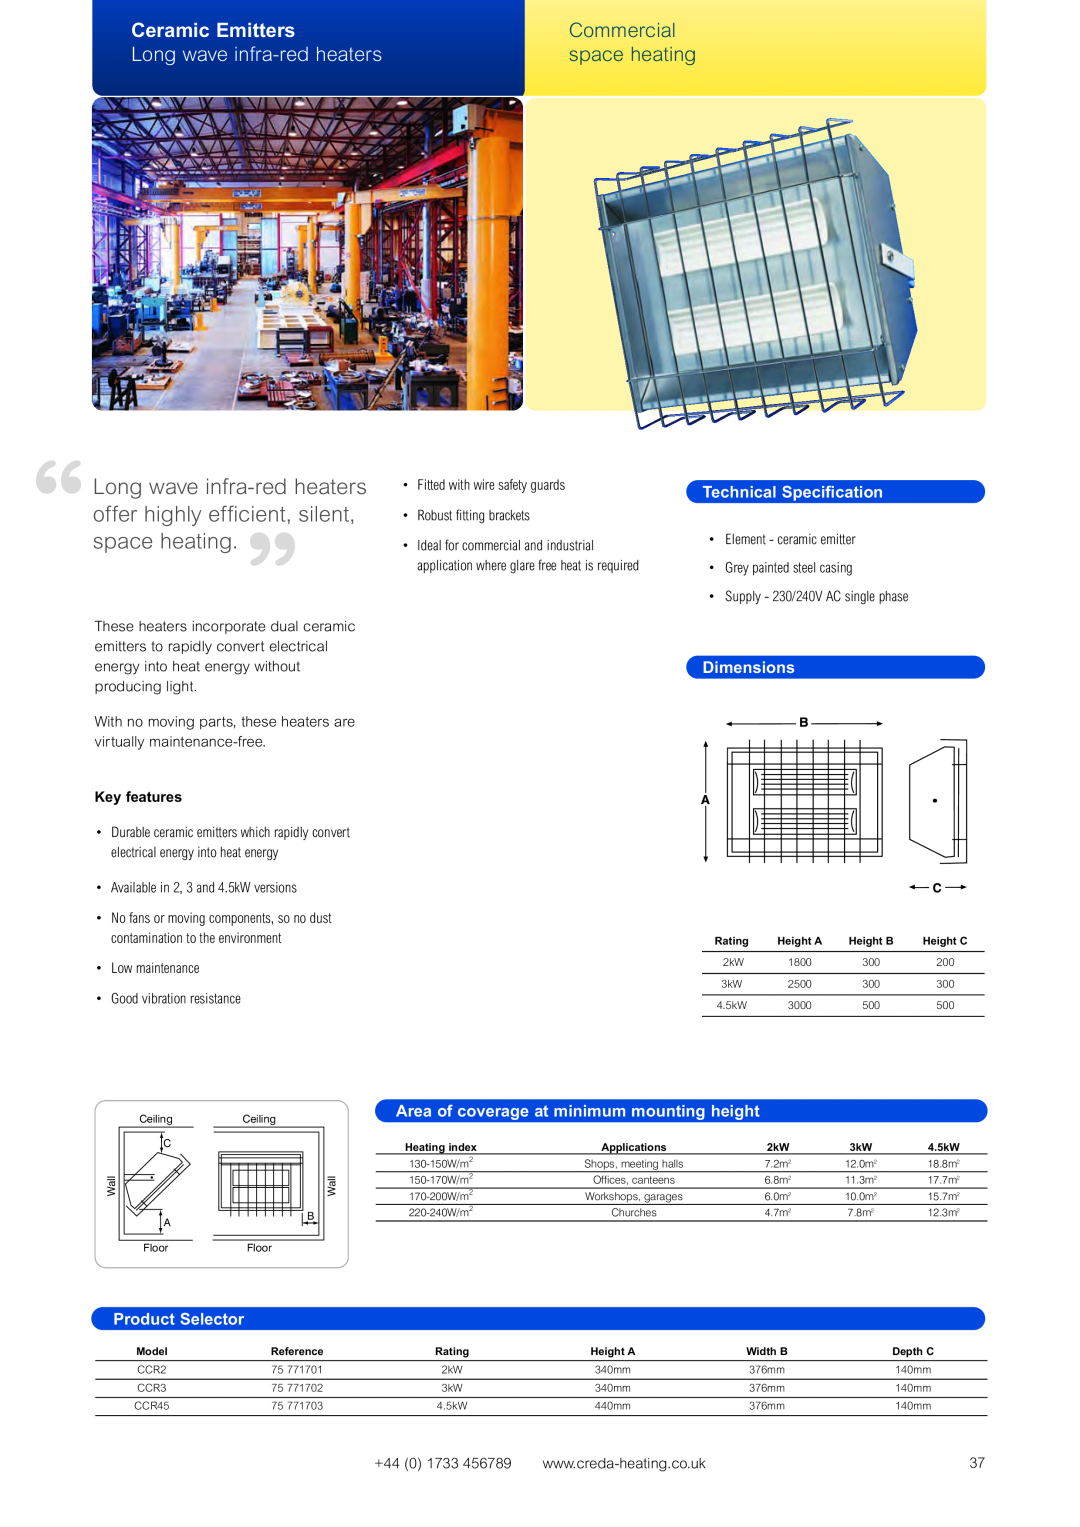 Signat CSP2 Ceramic Emitters, Long wave infra-red heaters, Technical Specification, Dimensions, Commercial space heating 